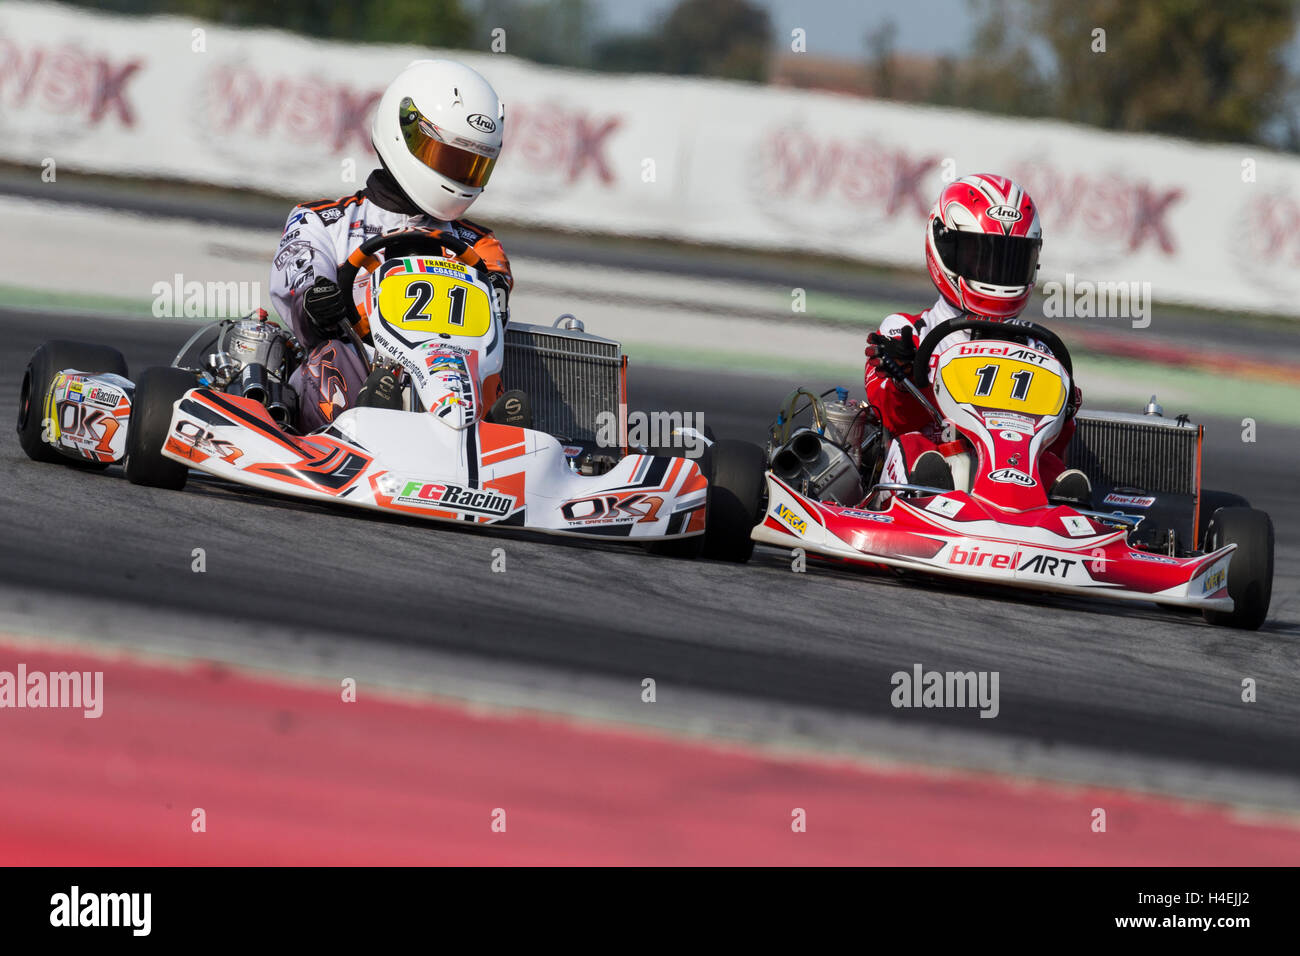 Adria, Rovigo (Italy) - October 1, 2016: Ok1 Racing Team, driven by Coassin Francesco during eliminatory heat in the Wsk Final Cup in Adria Karting Raceway, Italy. Stock Photo